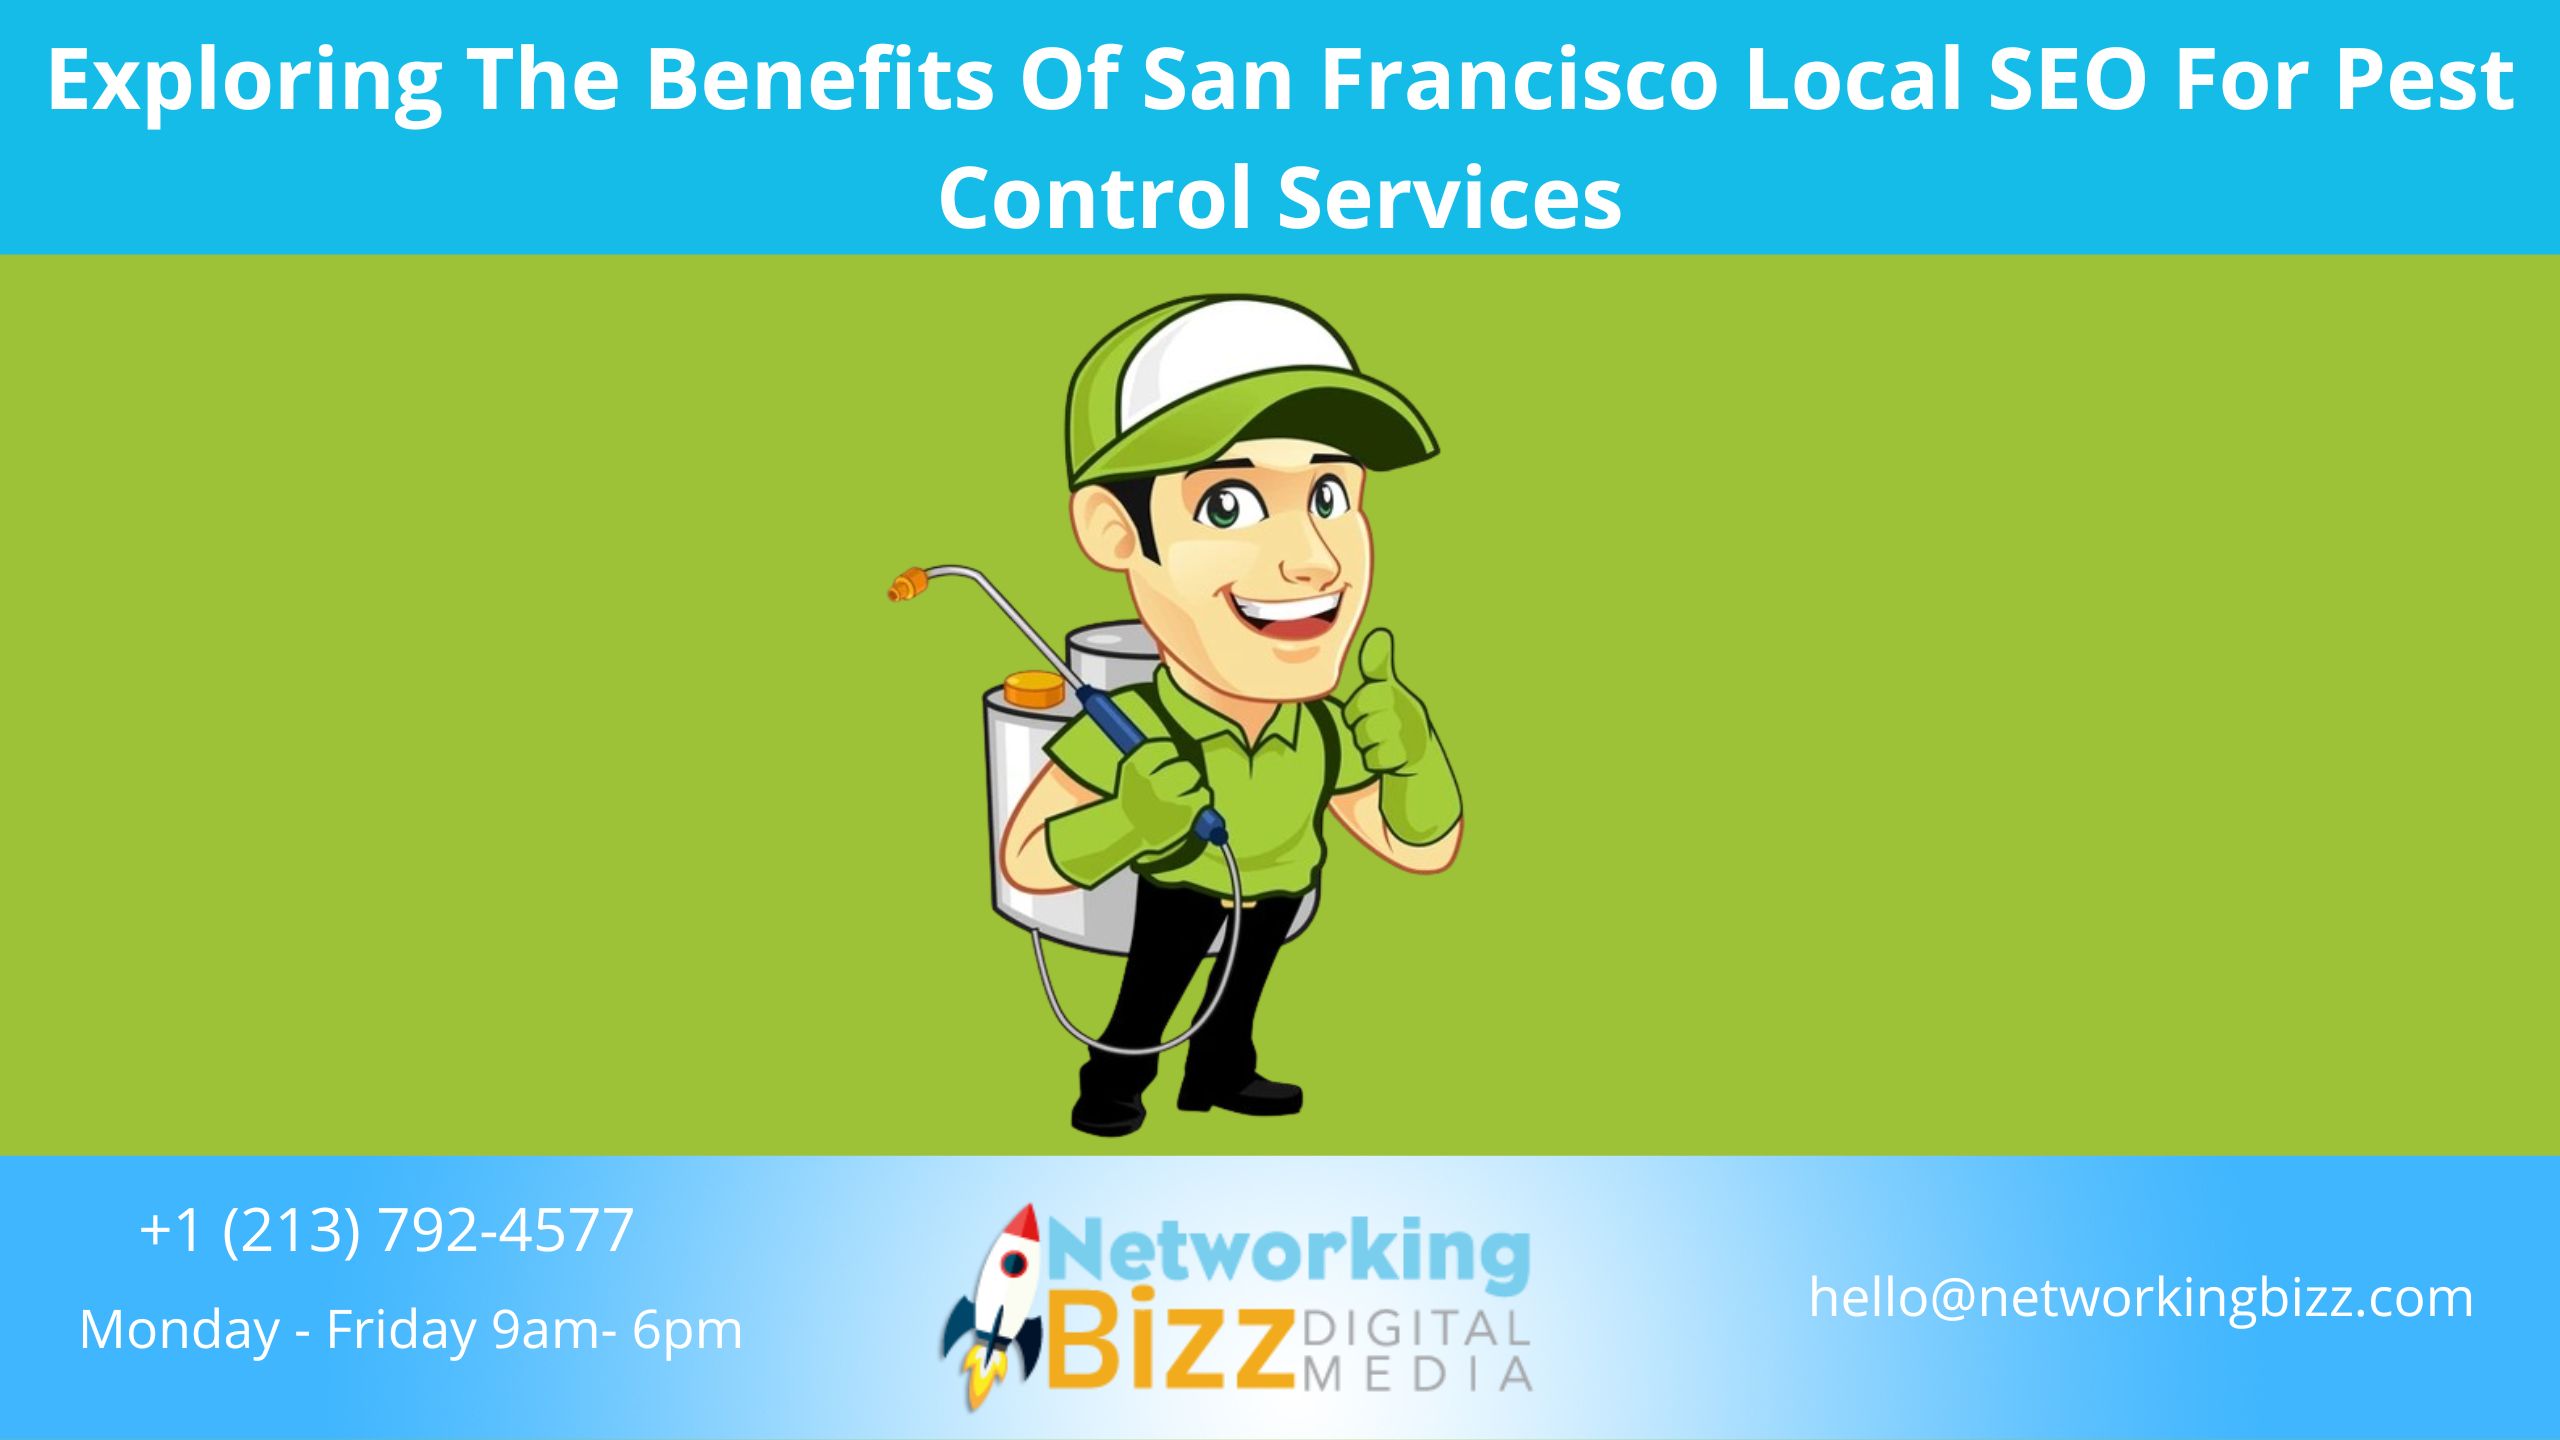 Exploring The Benefits Of San Francisco Local SEO For Pest Control Services